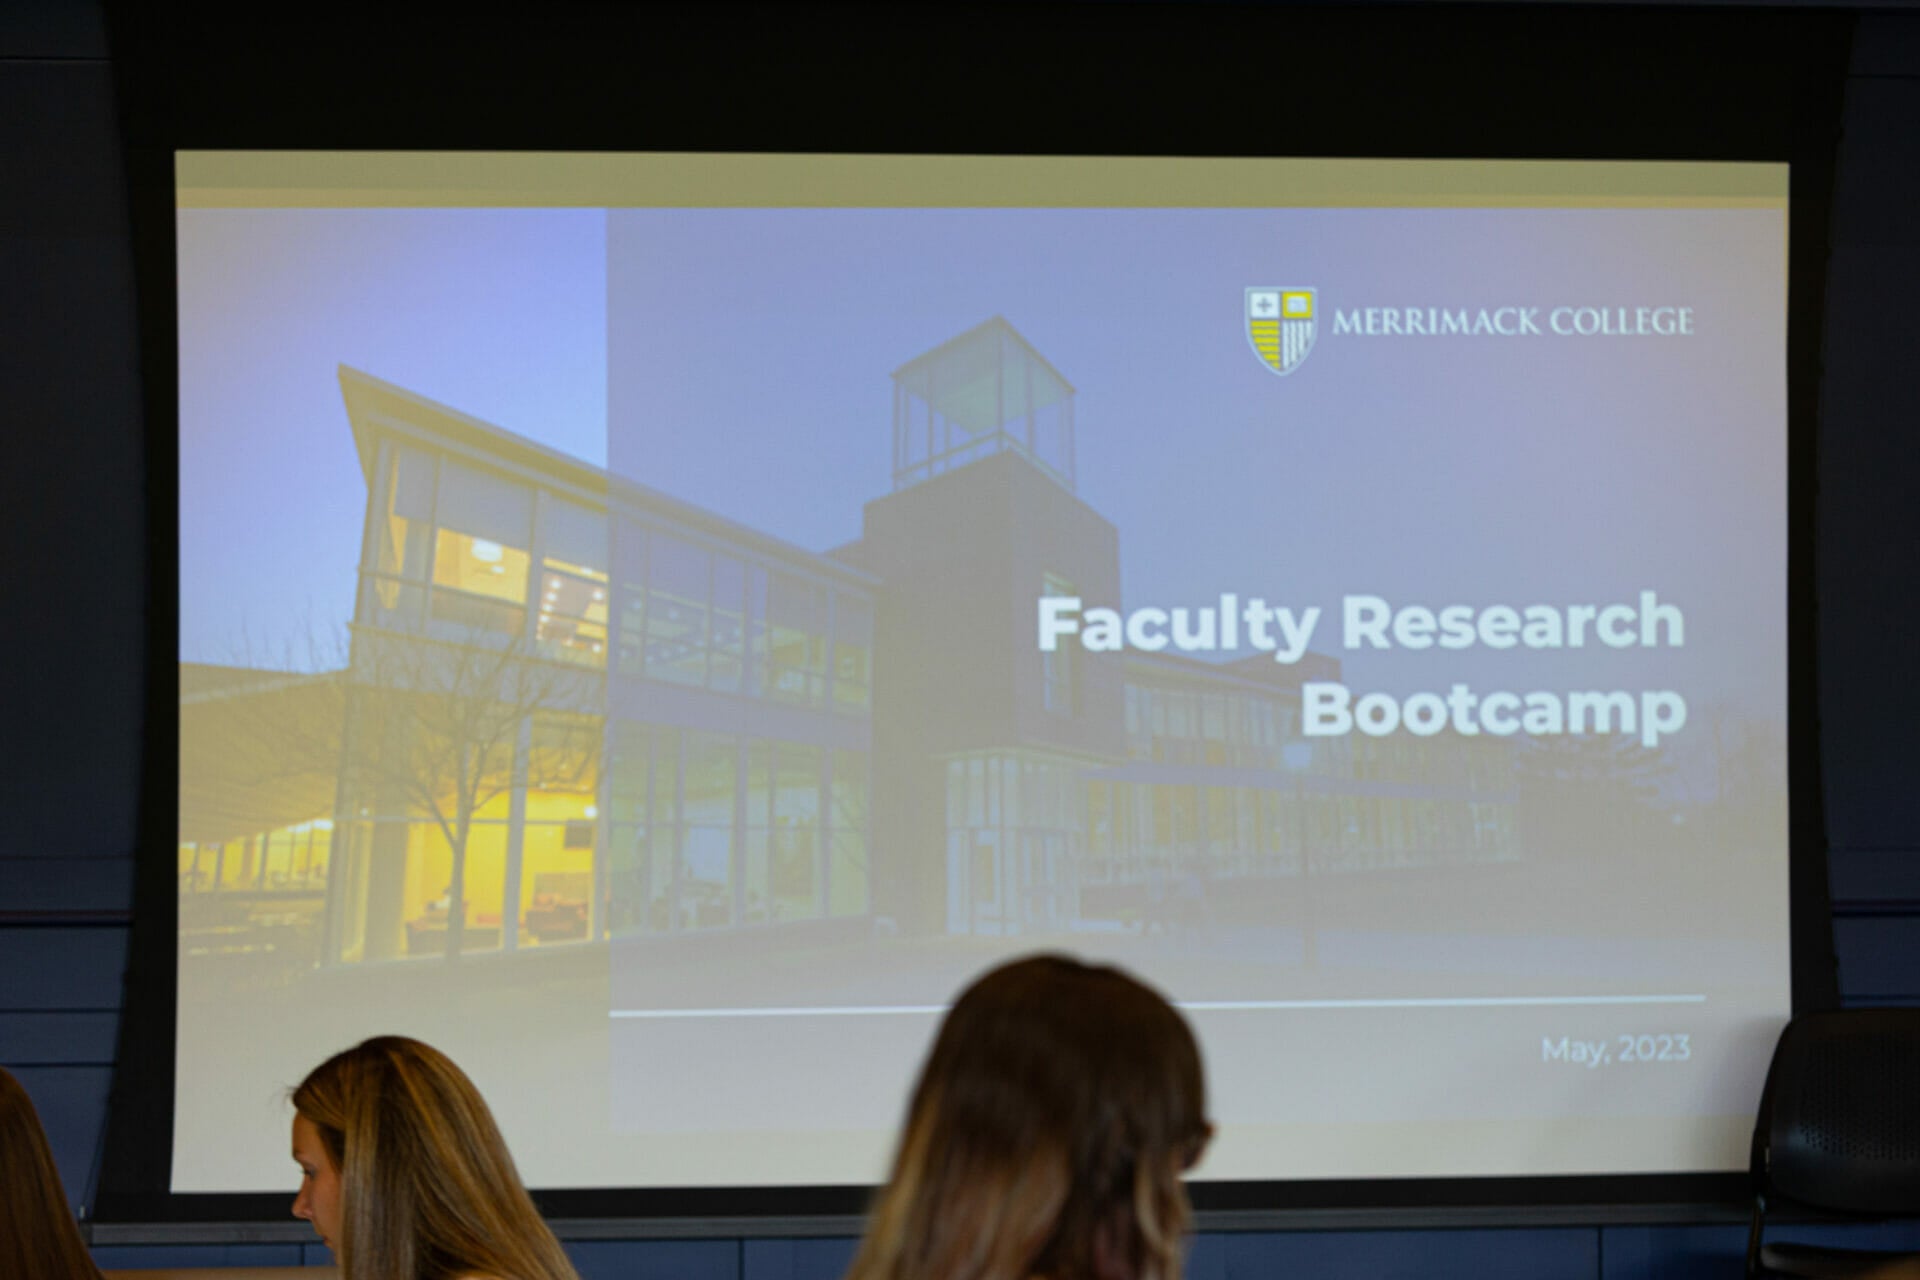 Faculty Research Bootcamp